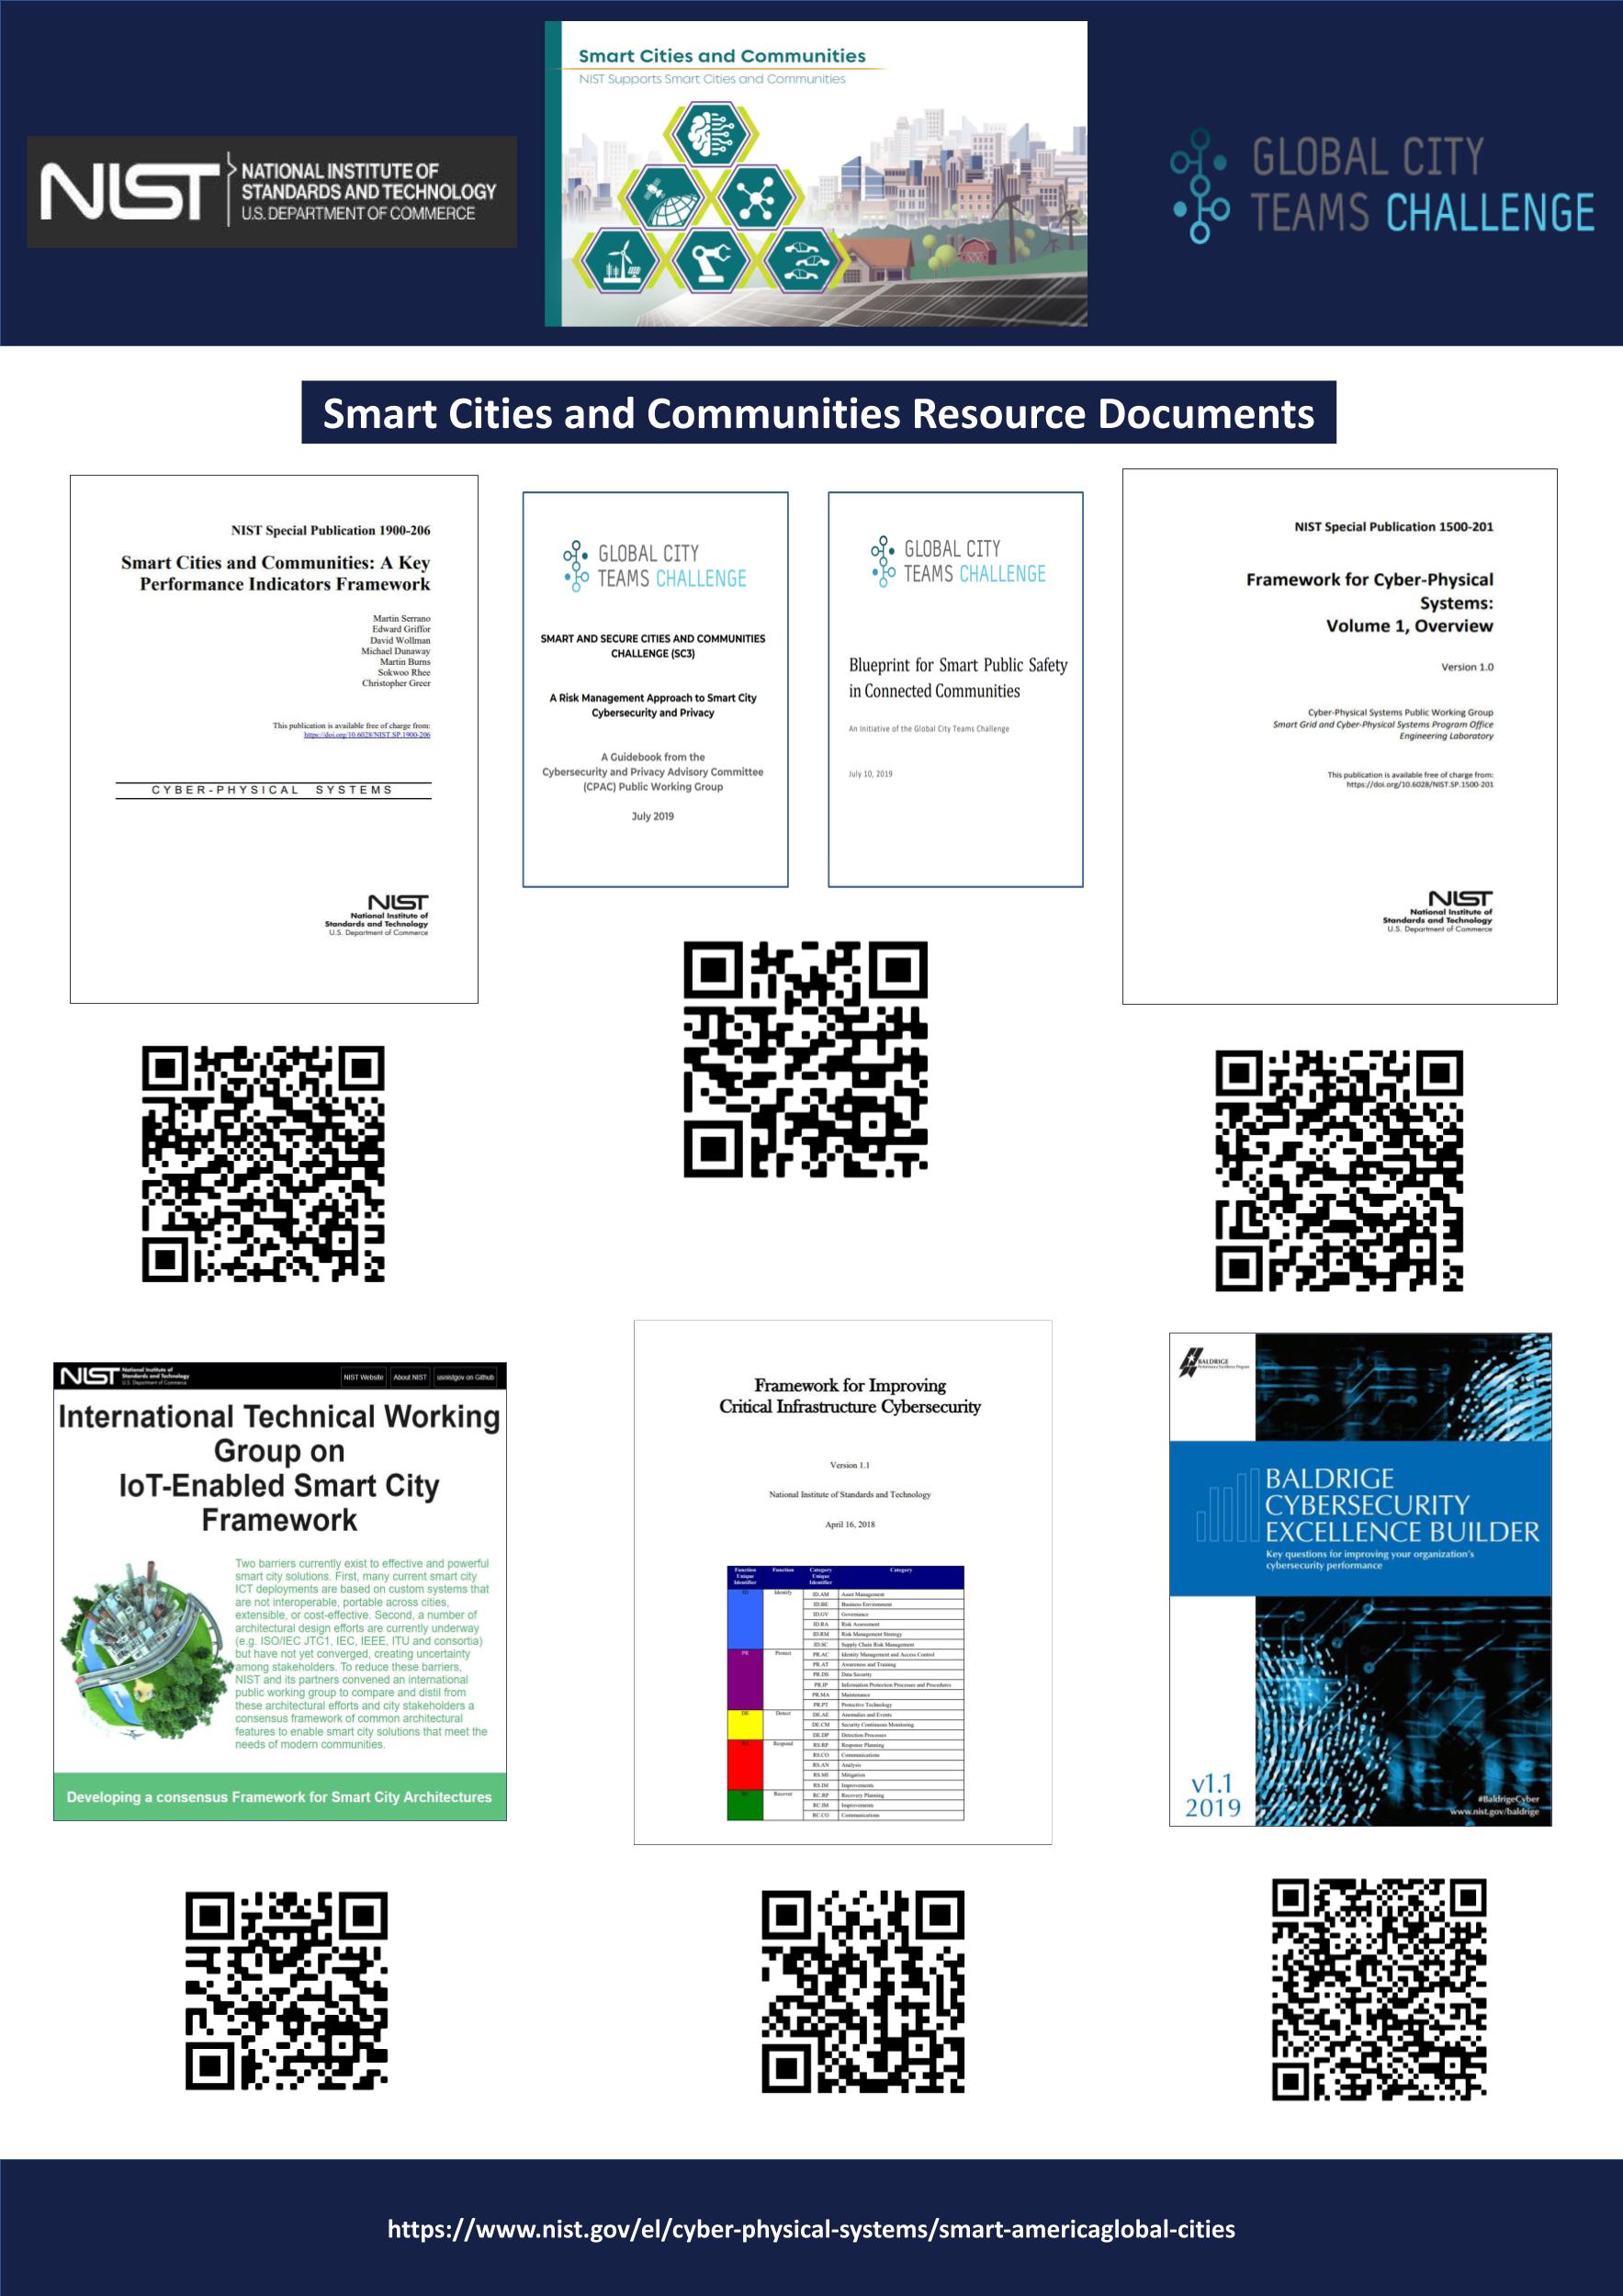 Smart Cities Reference Documents